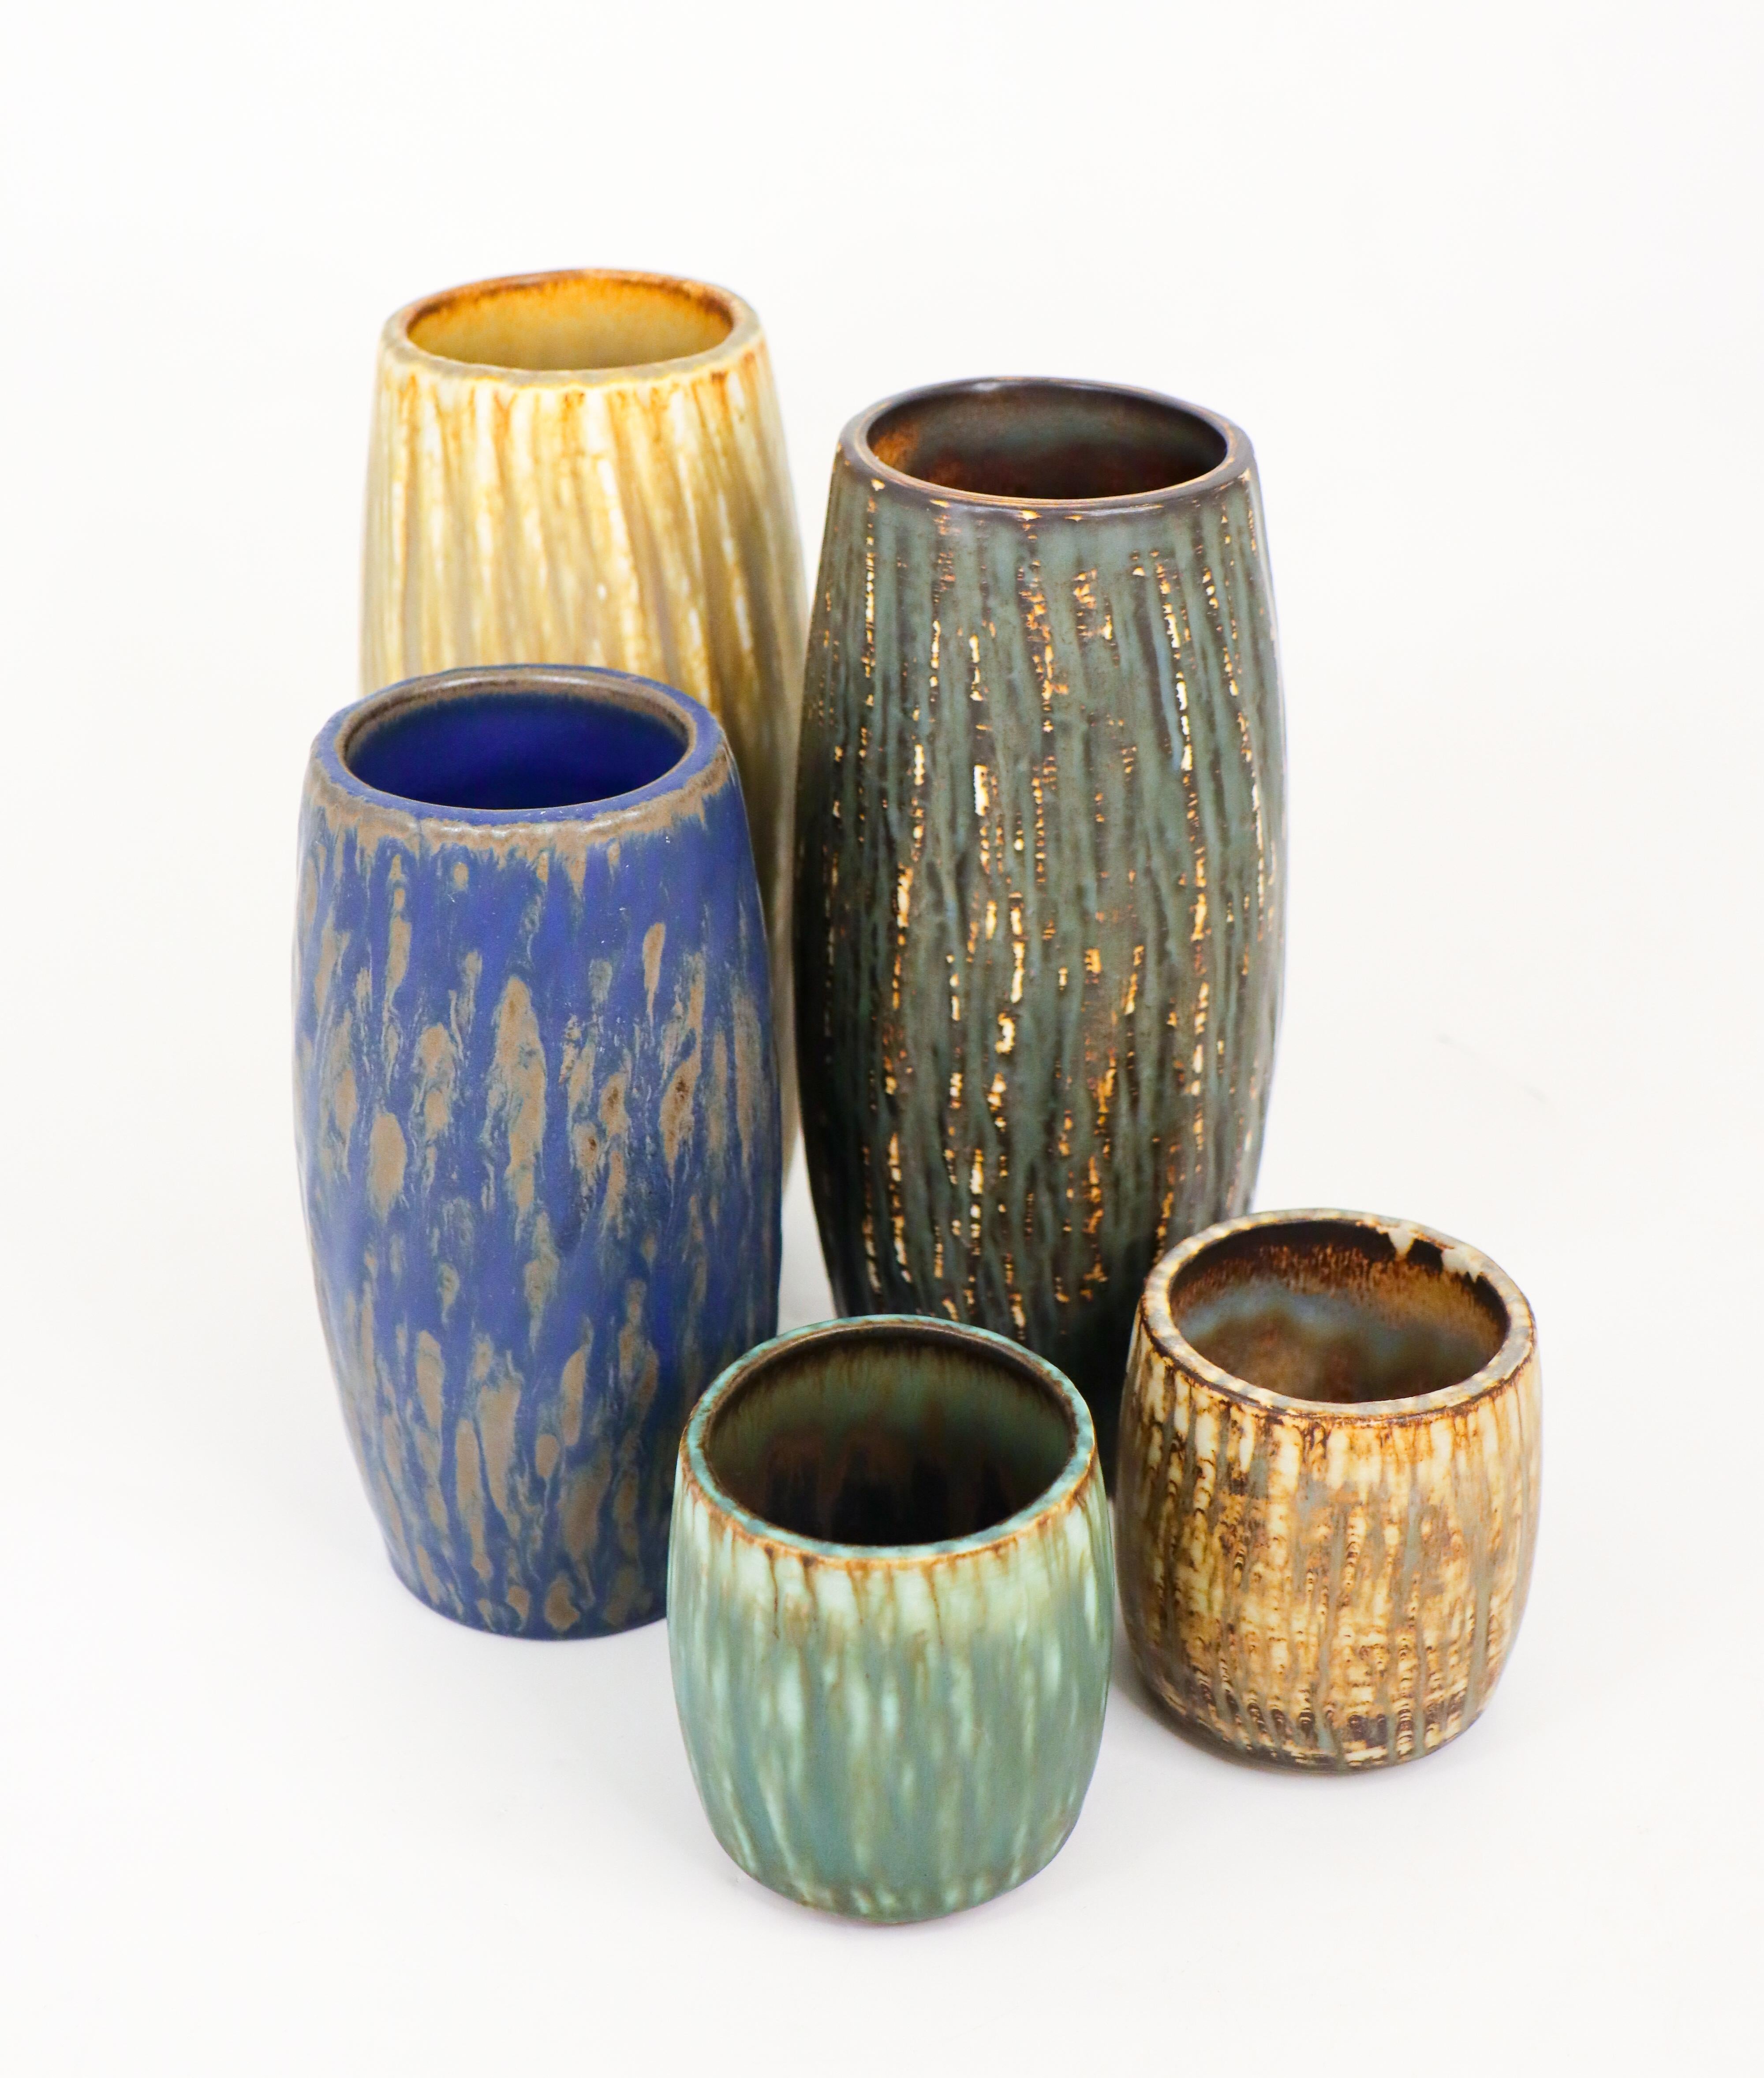 Group of 5 Ceramic Vases - Rubus Rörstrand - Gunnar Nylund In Excellent Condition For Sale In Stockholm, SE